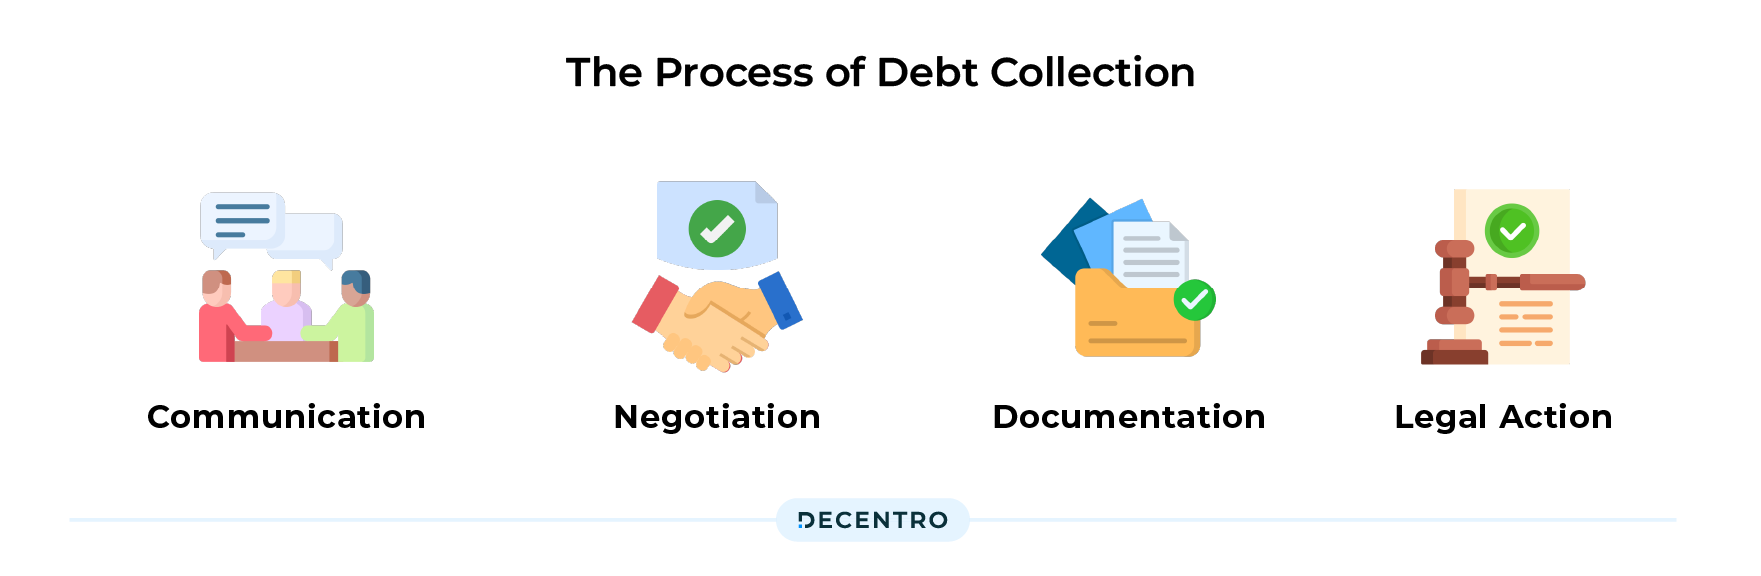 Debt Collection - Steps